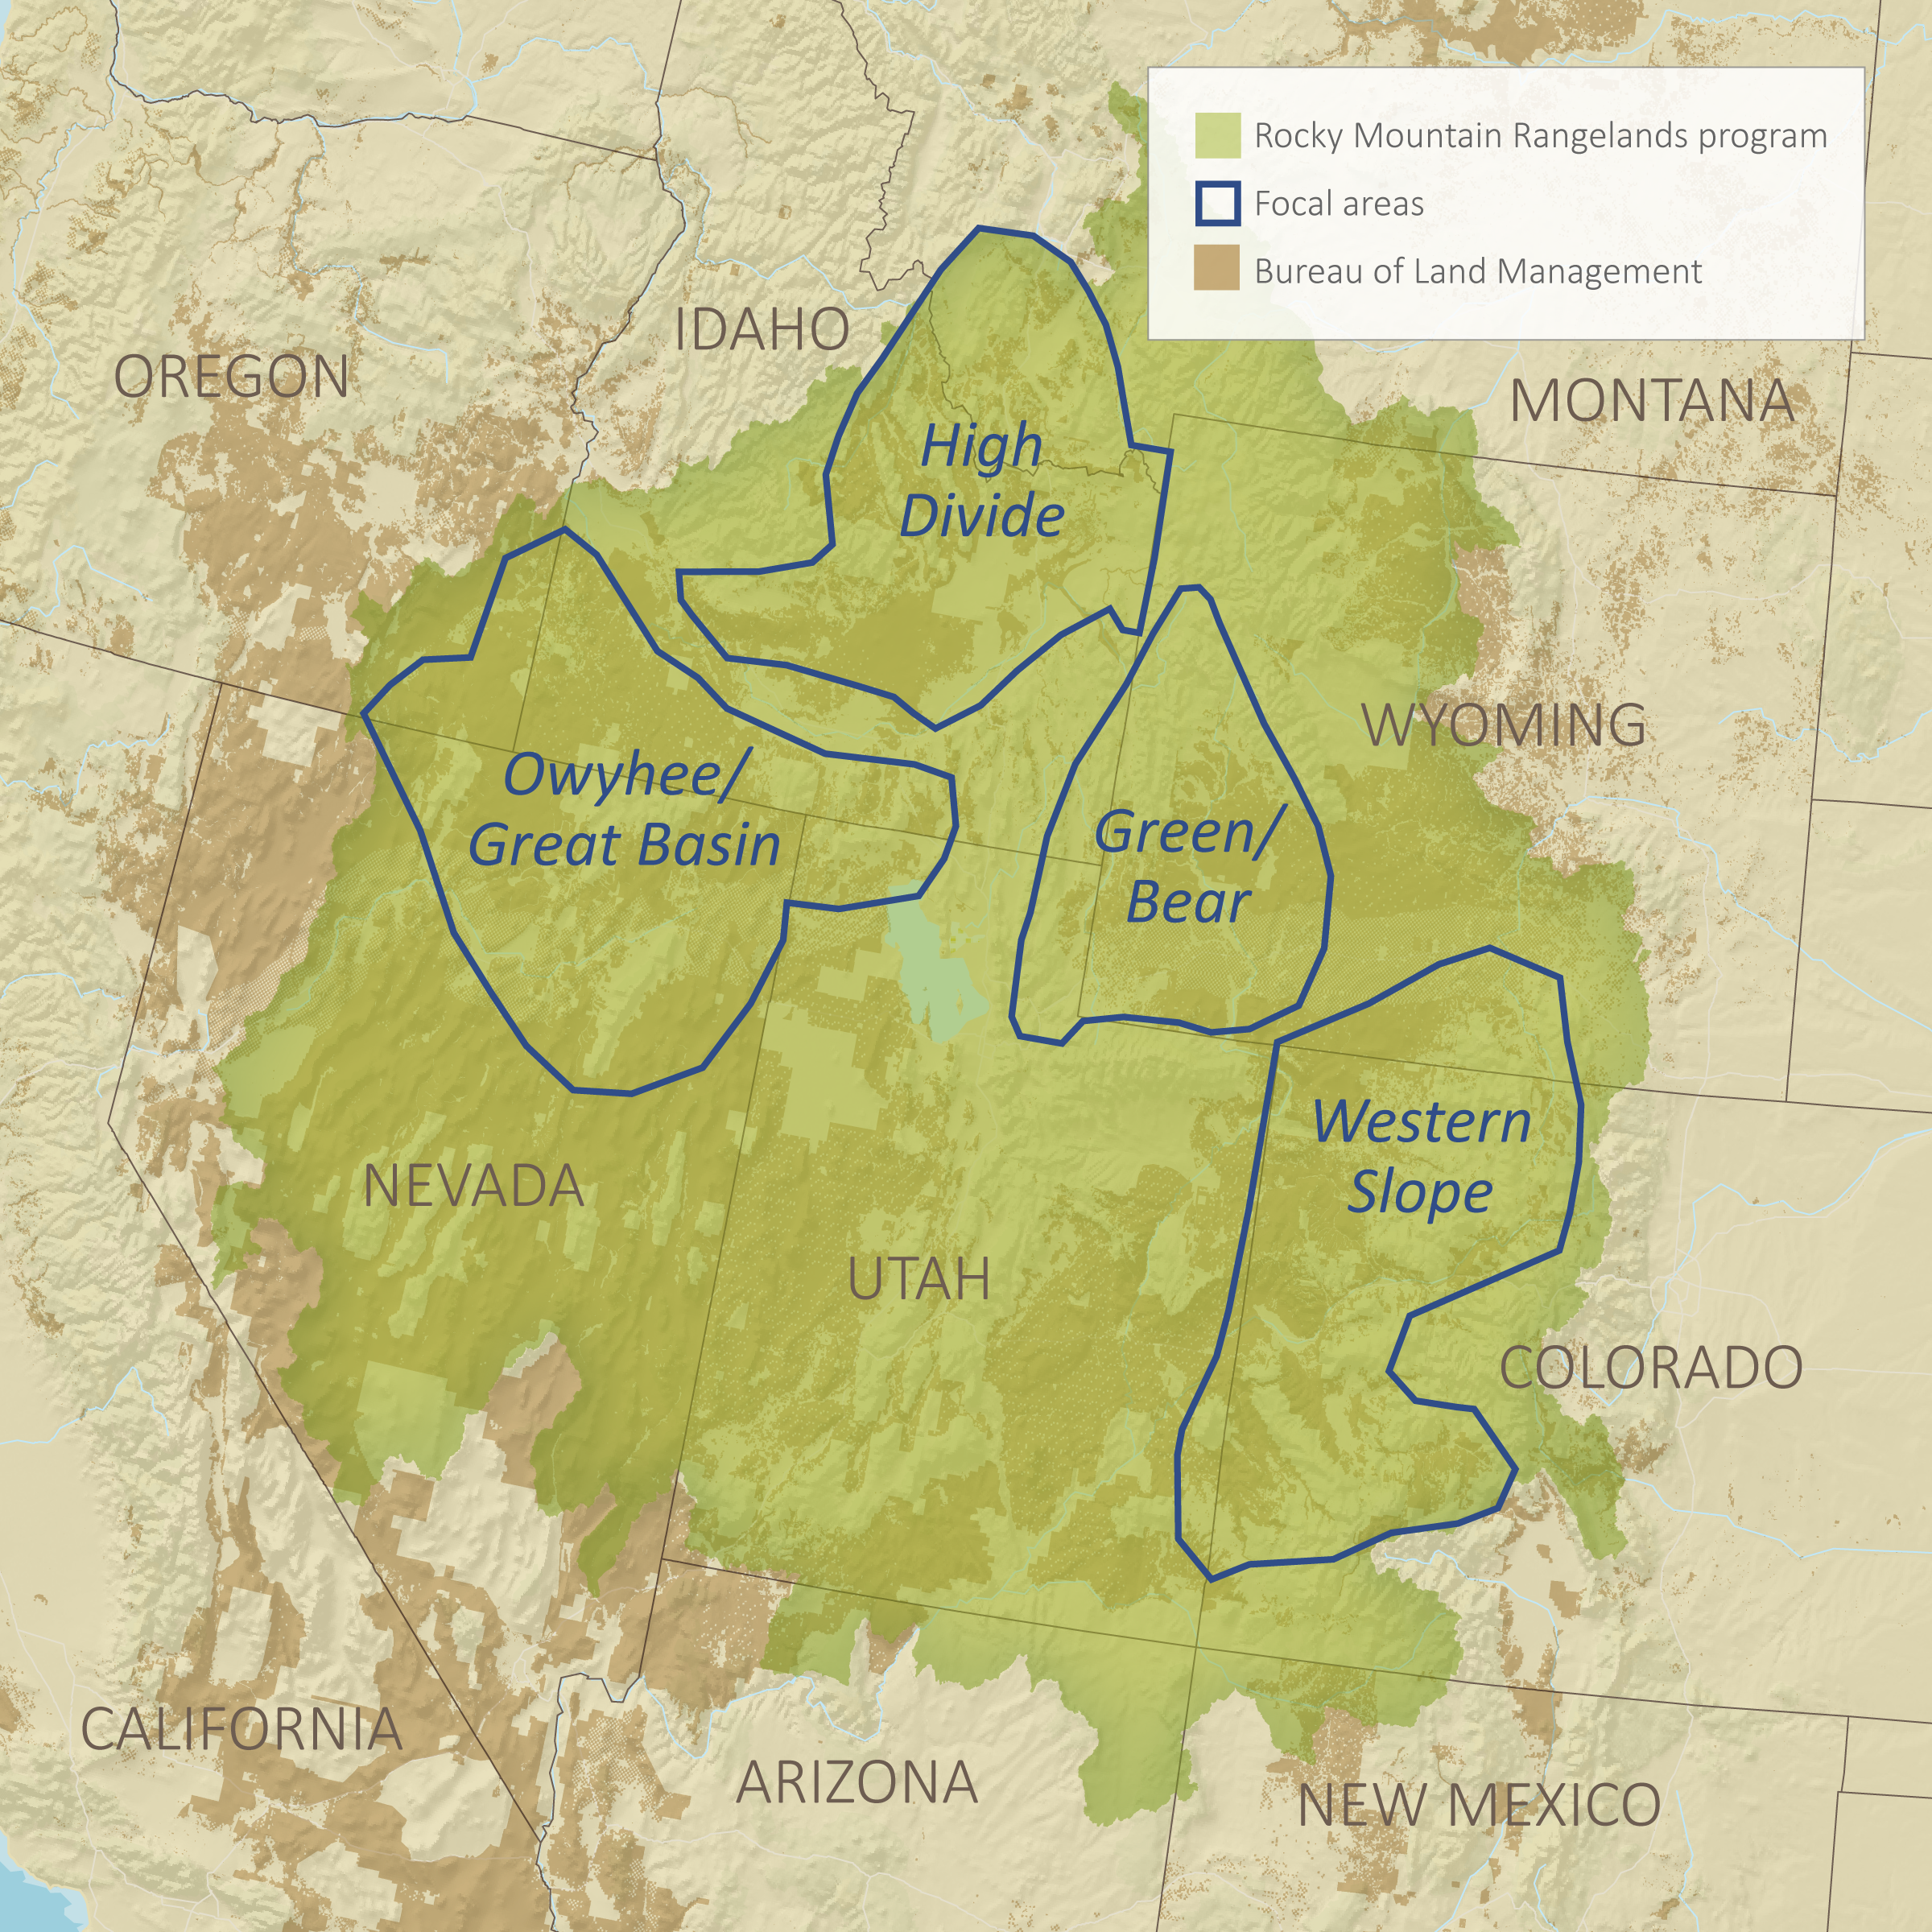 A map of NFWF's Rocky Mountain Rangelands business plan footprint, including portions of Oregon, Idaho, Montana, Wyoming, Colorado, Utah, New Mexico, Arizona, and Nevada. Four focal areas are highlighted in blue: Owyhee/Great Basin, High Divide, Green/Bear, and Western Slope.